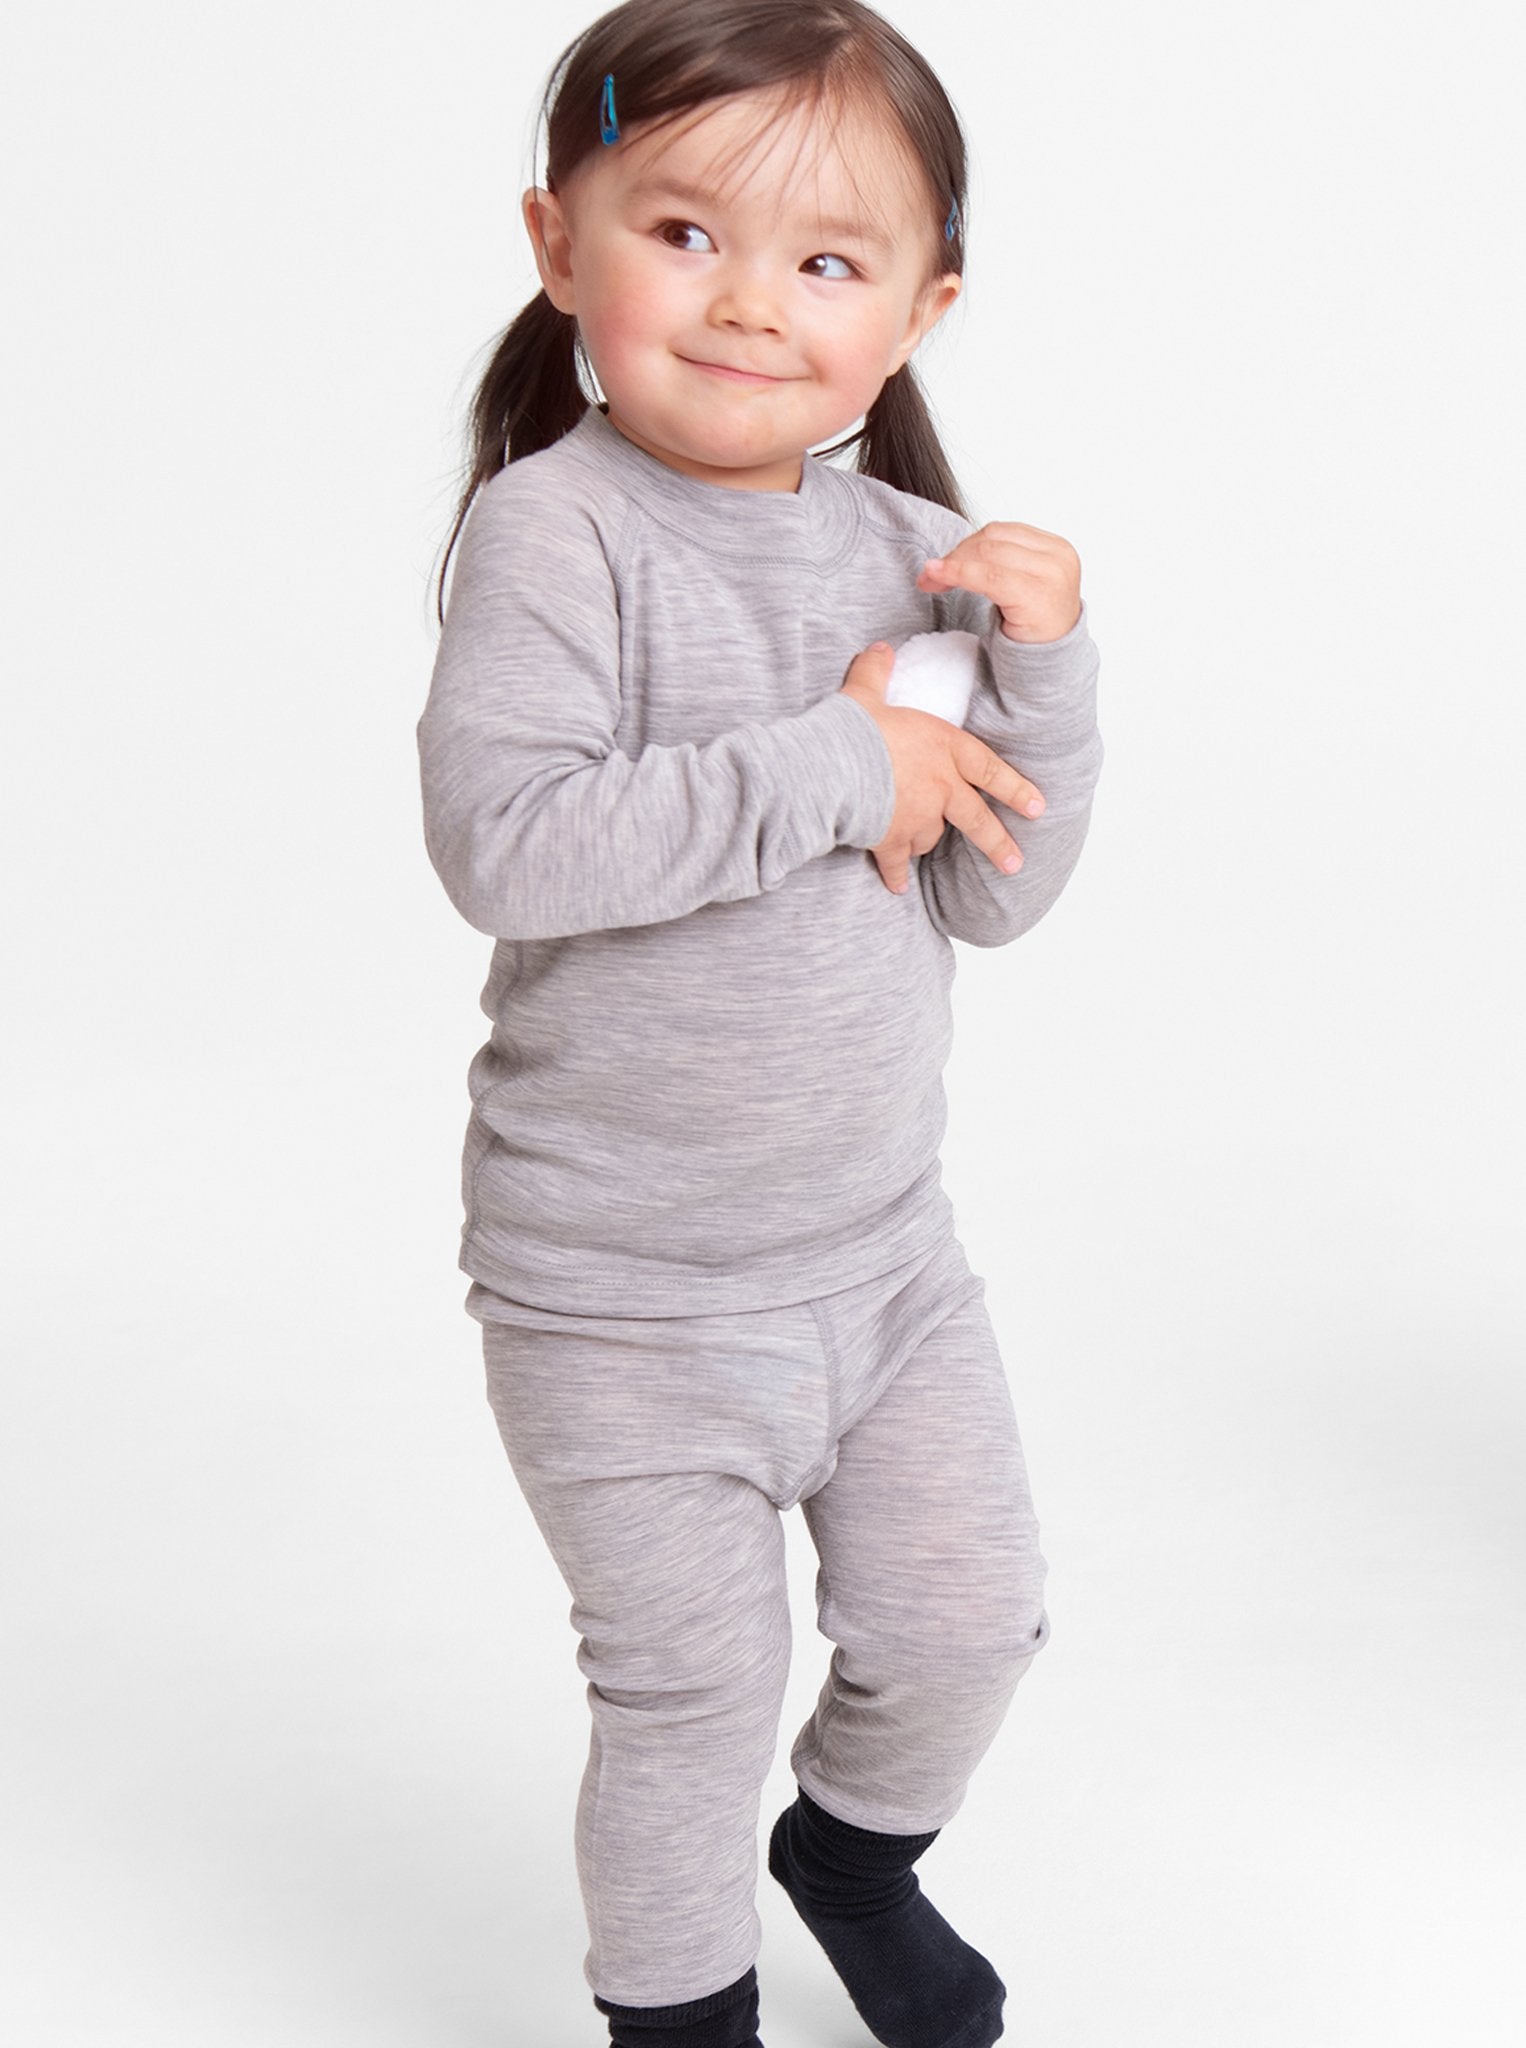 kids merino wool top grey, warm and comfortable, ethical and long lasting polarn o. pyret